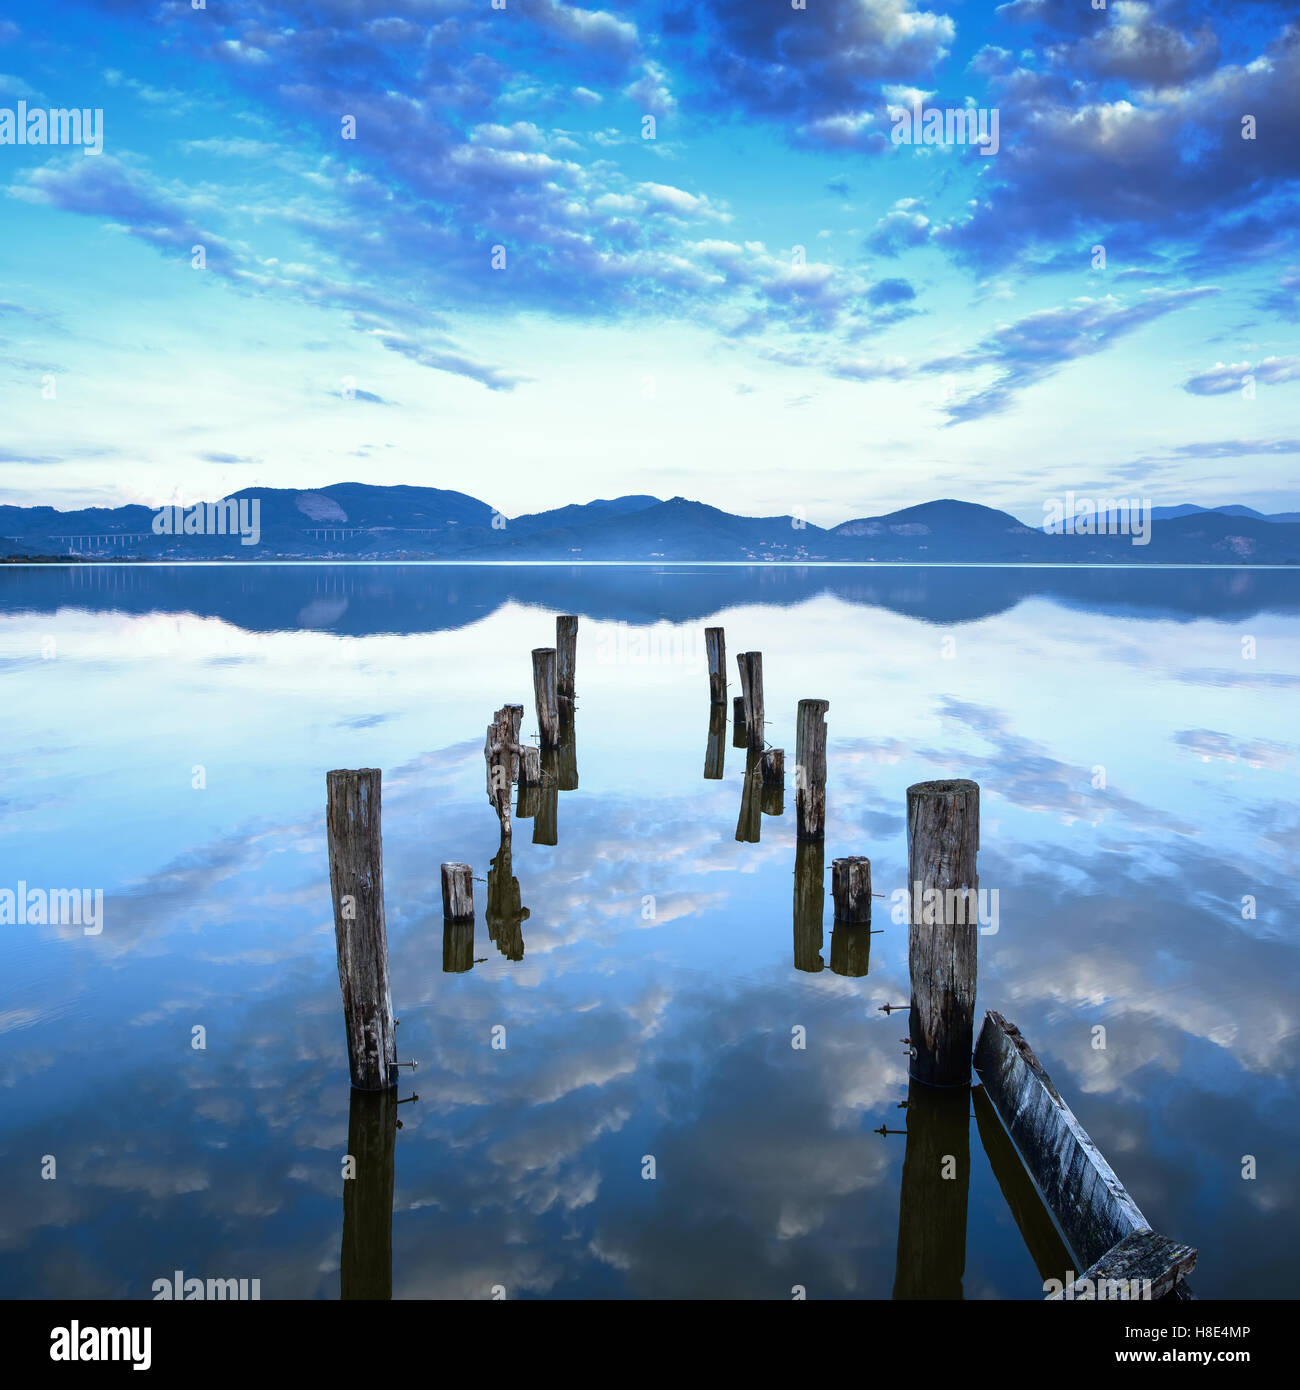 Wooden pier or jetty remains on a blue lake sunset and cloudy sky reflection on water. Versilia Massaciuccoli, Tuscany, Italy. Stock Photo